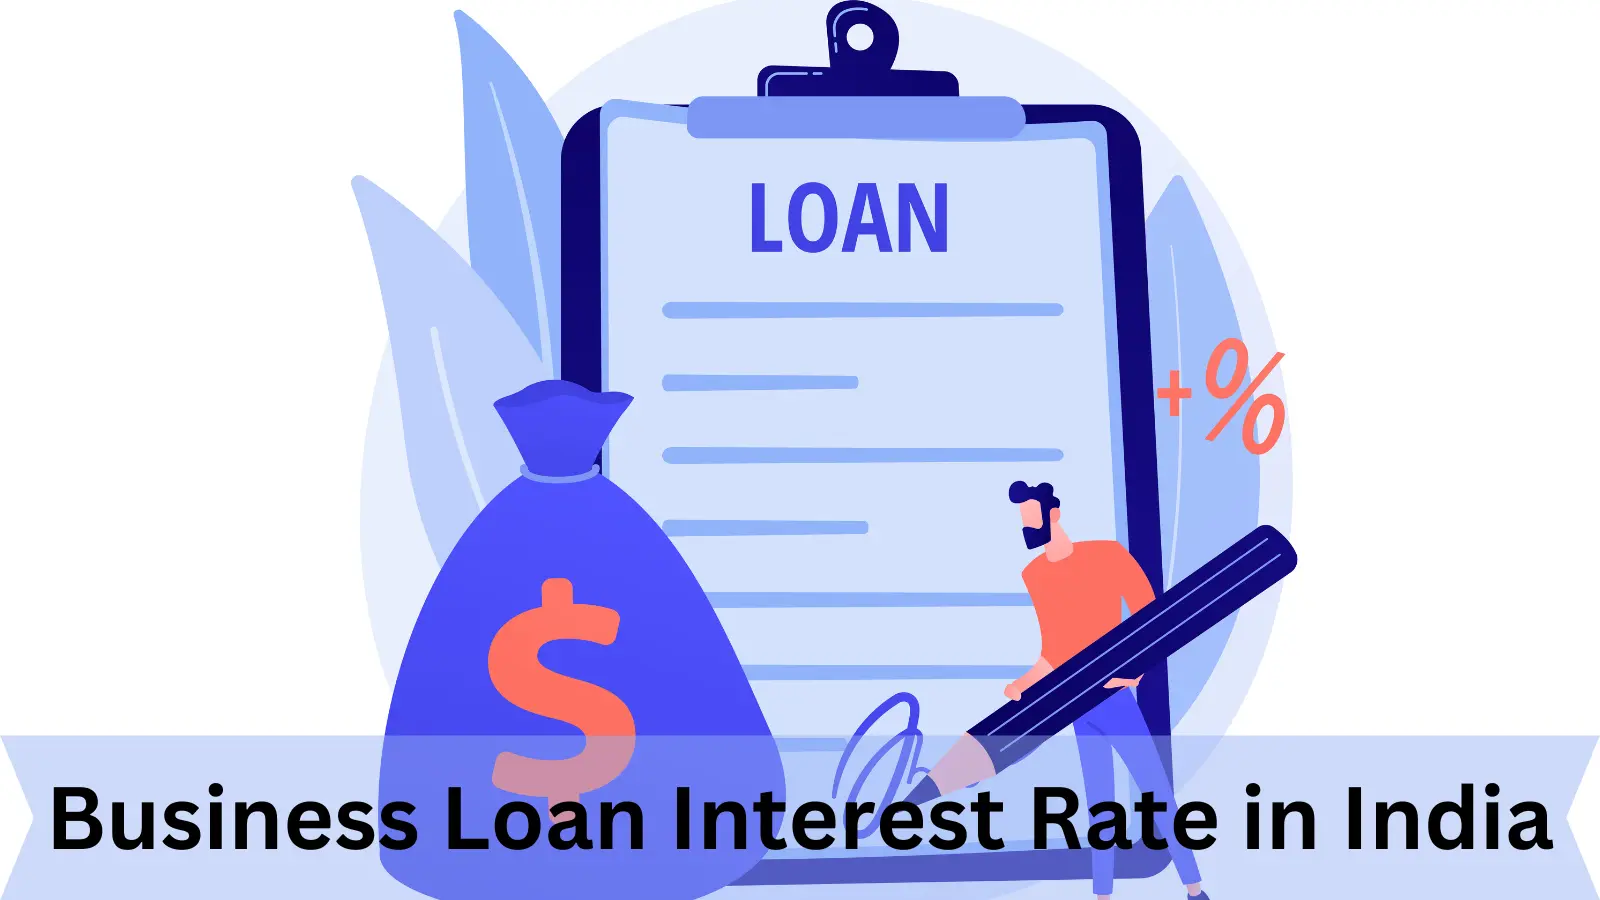 Business Loan Interest Rate in India